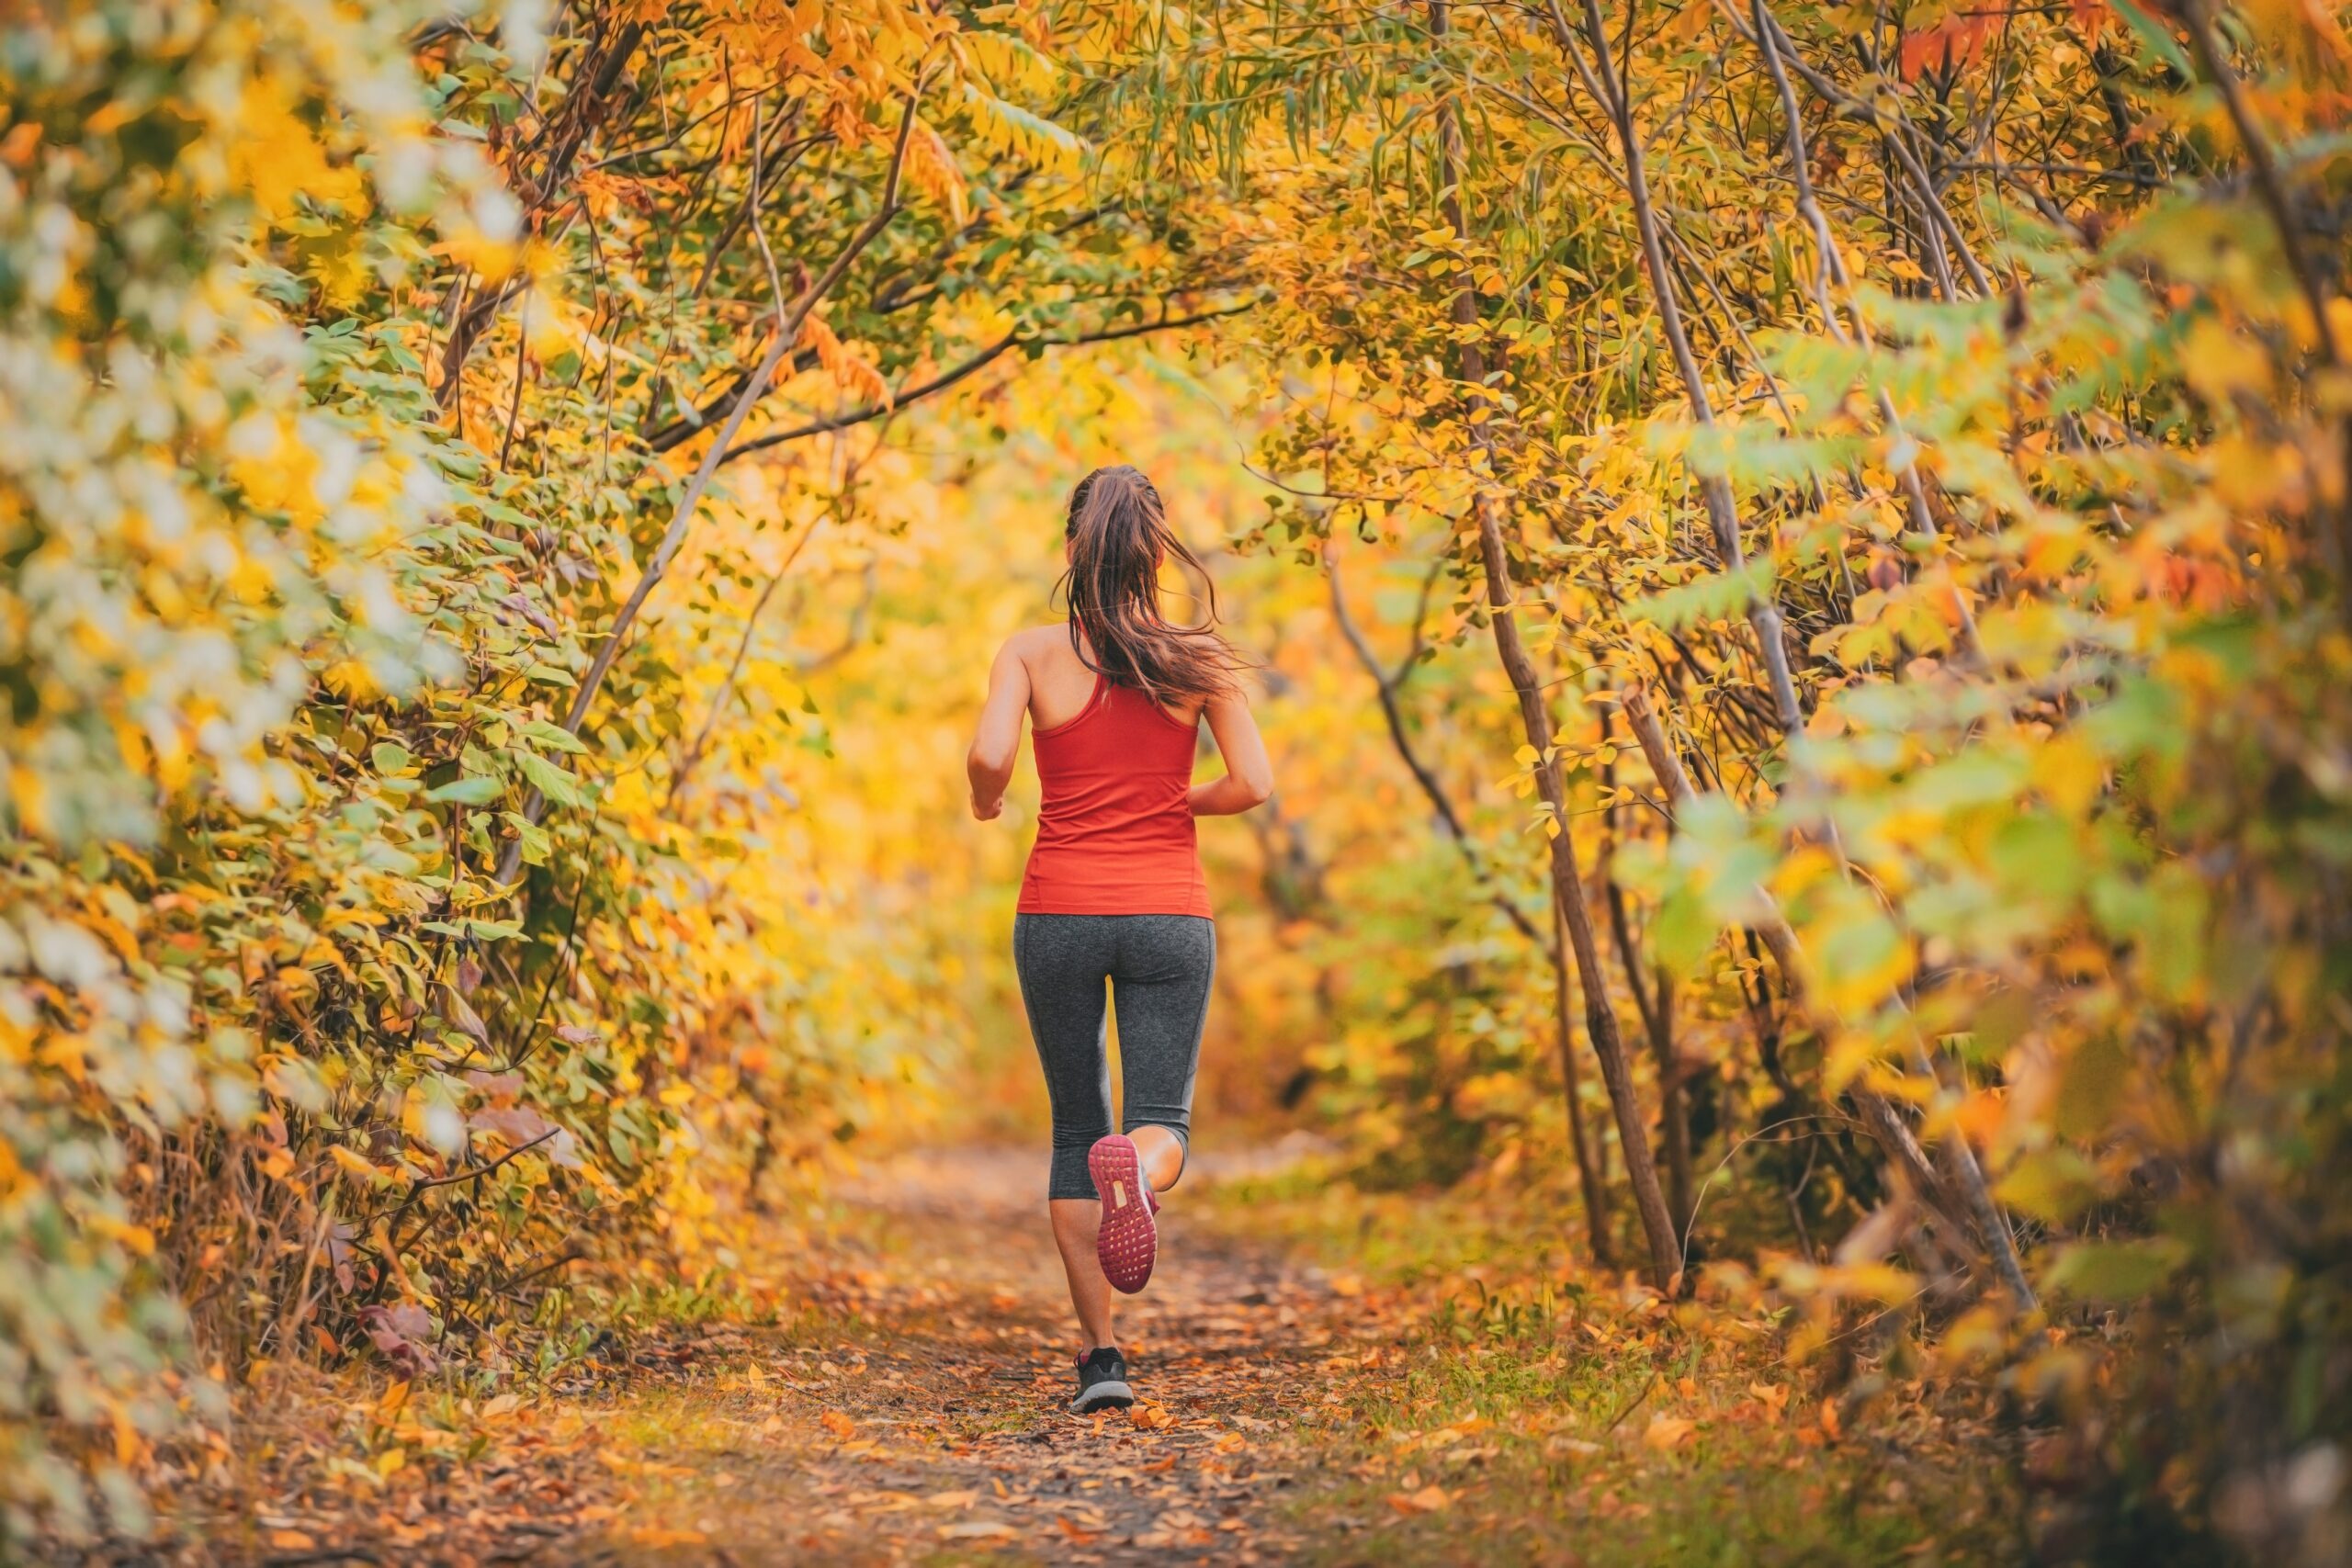 Outdoor,Sports,Active,Lifestyle,Runner,Running,In,Forest,Woods,Foliage